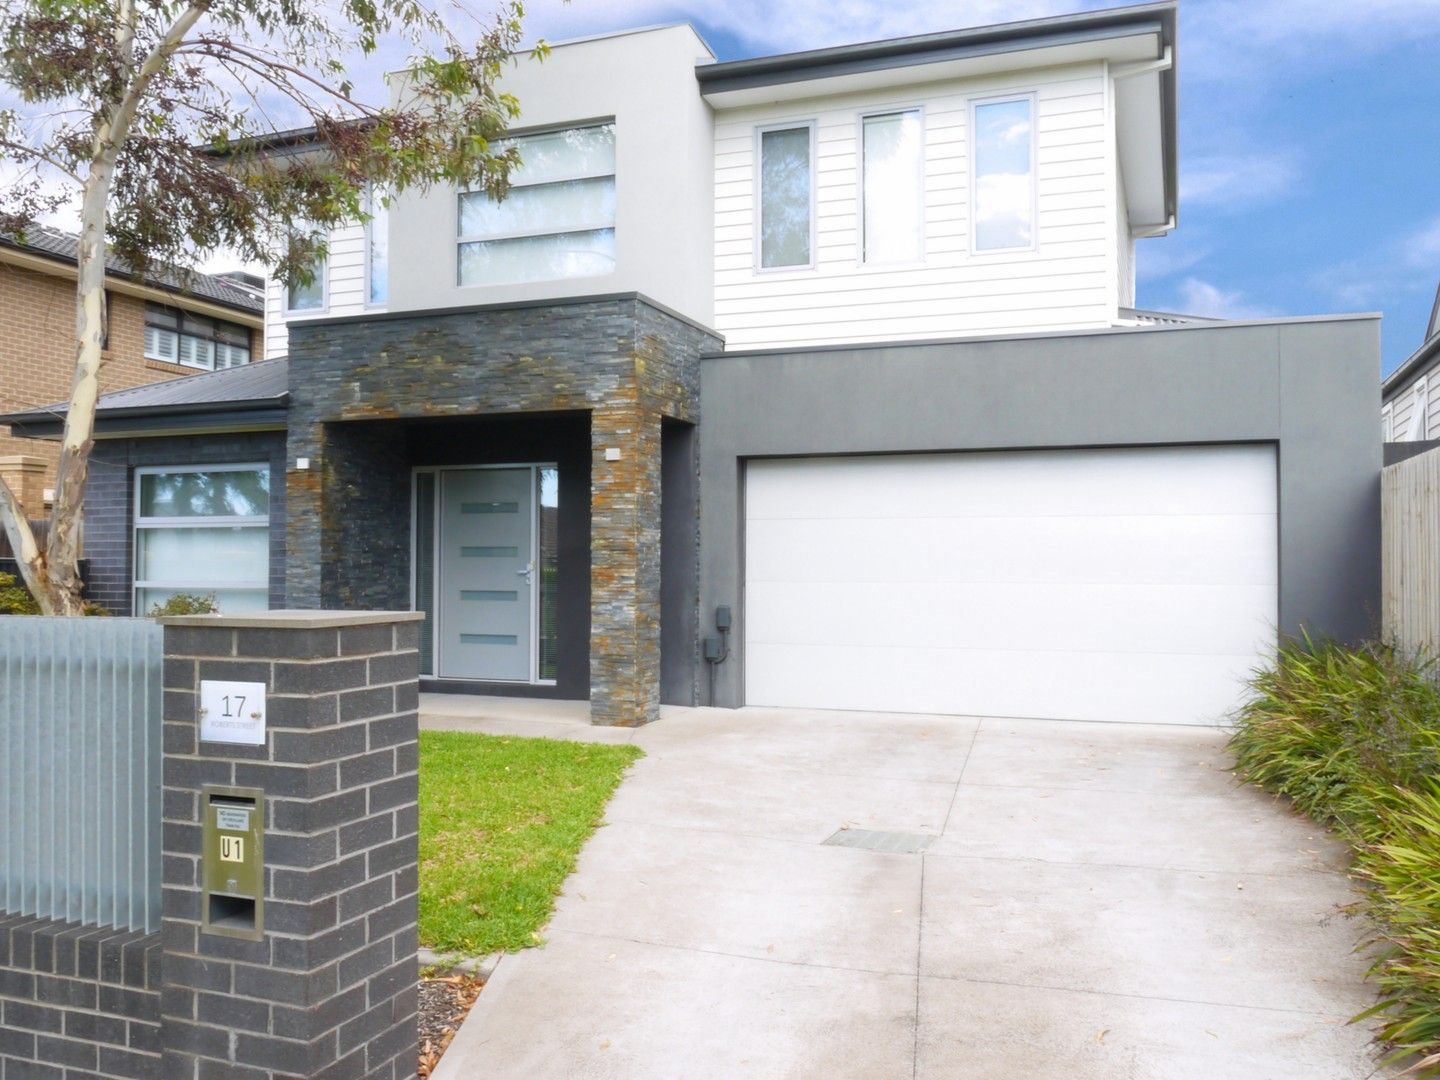 4 bedrooms Townhouse in 1/17 Roberts St ESSENDON VIC, 3040